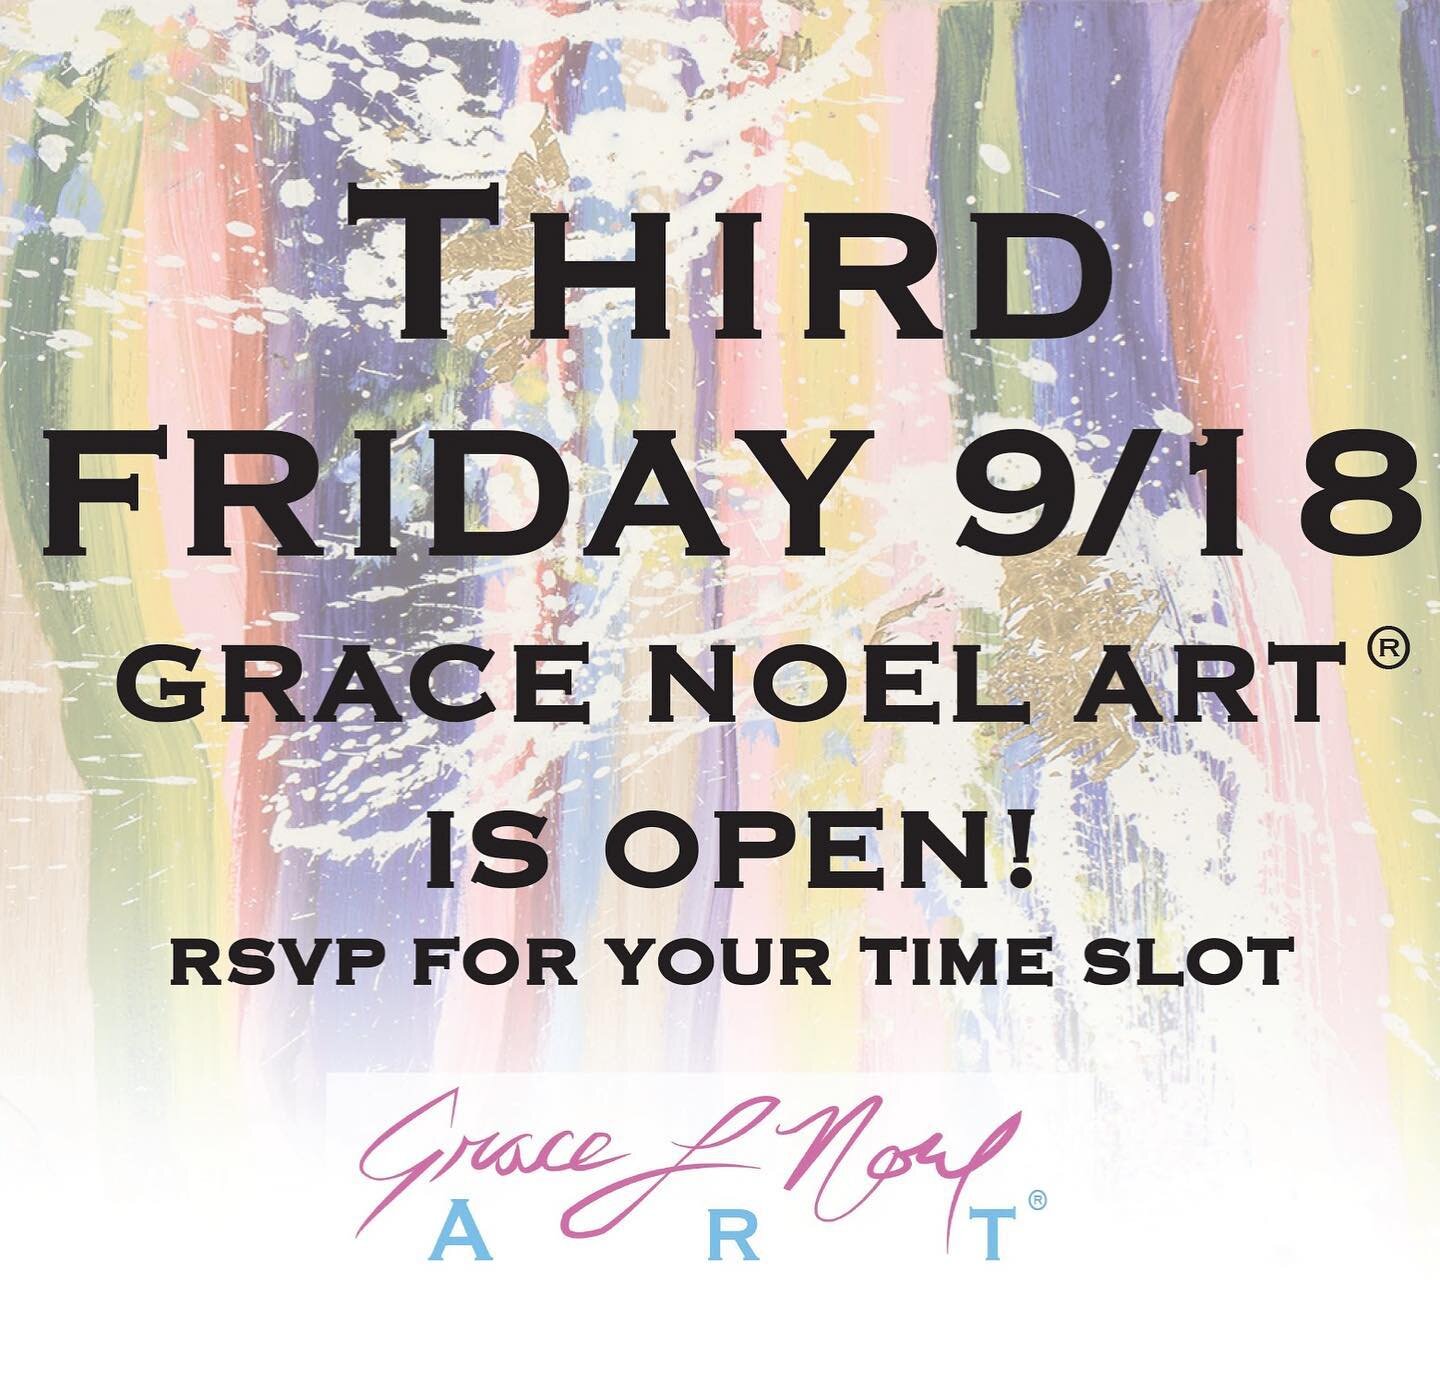 It&rsquo;s Third Friday in @denversartdistrict on Santa Fe! I am in the studio all day so come by and say hi! Event information is on Eventbrite and GNArt Facebook Page👍🏽💖.
.
.
#gracenoelart #thirdfriday #artdistictonsantafe #art #artgalleries #ar